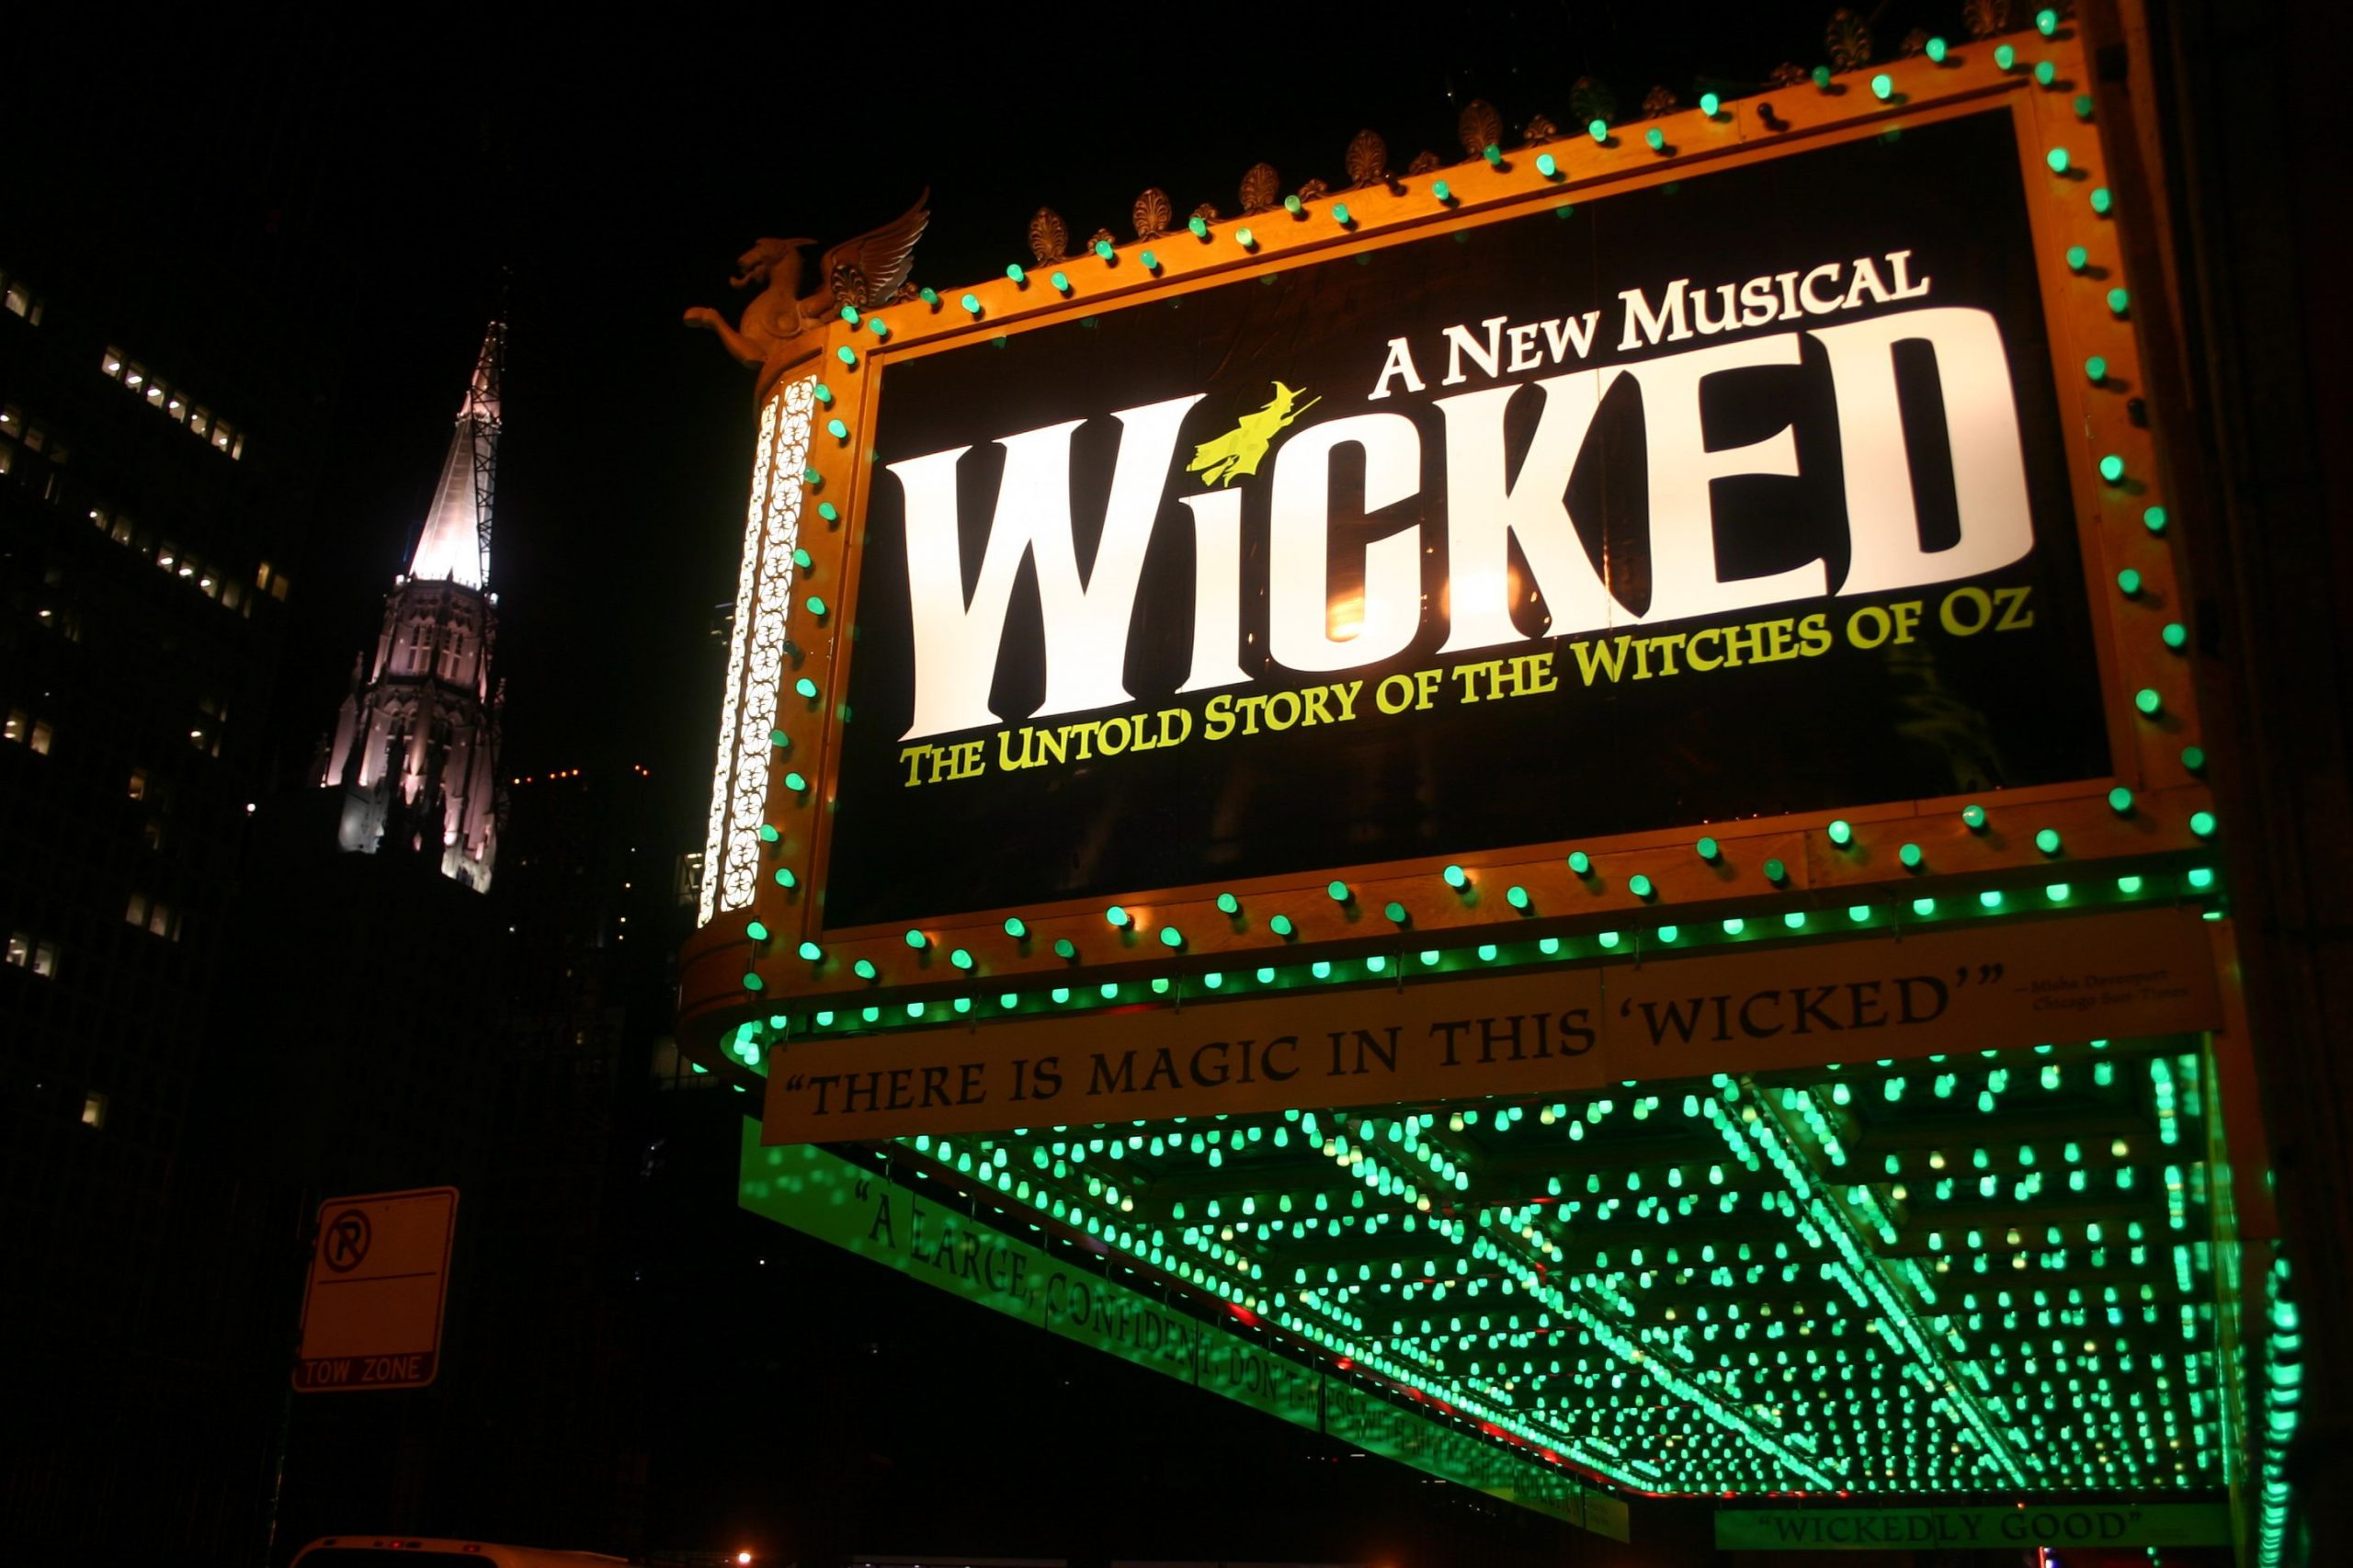 The Best Broadway Shows to See in New York City